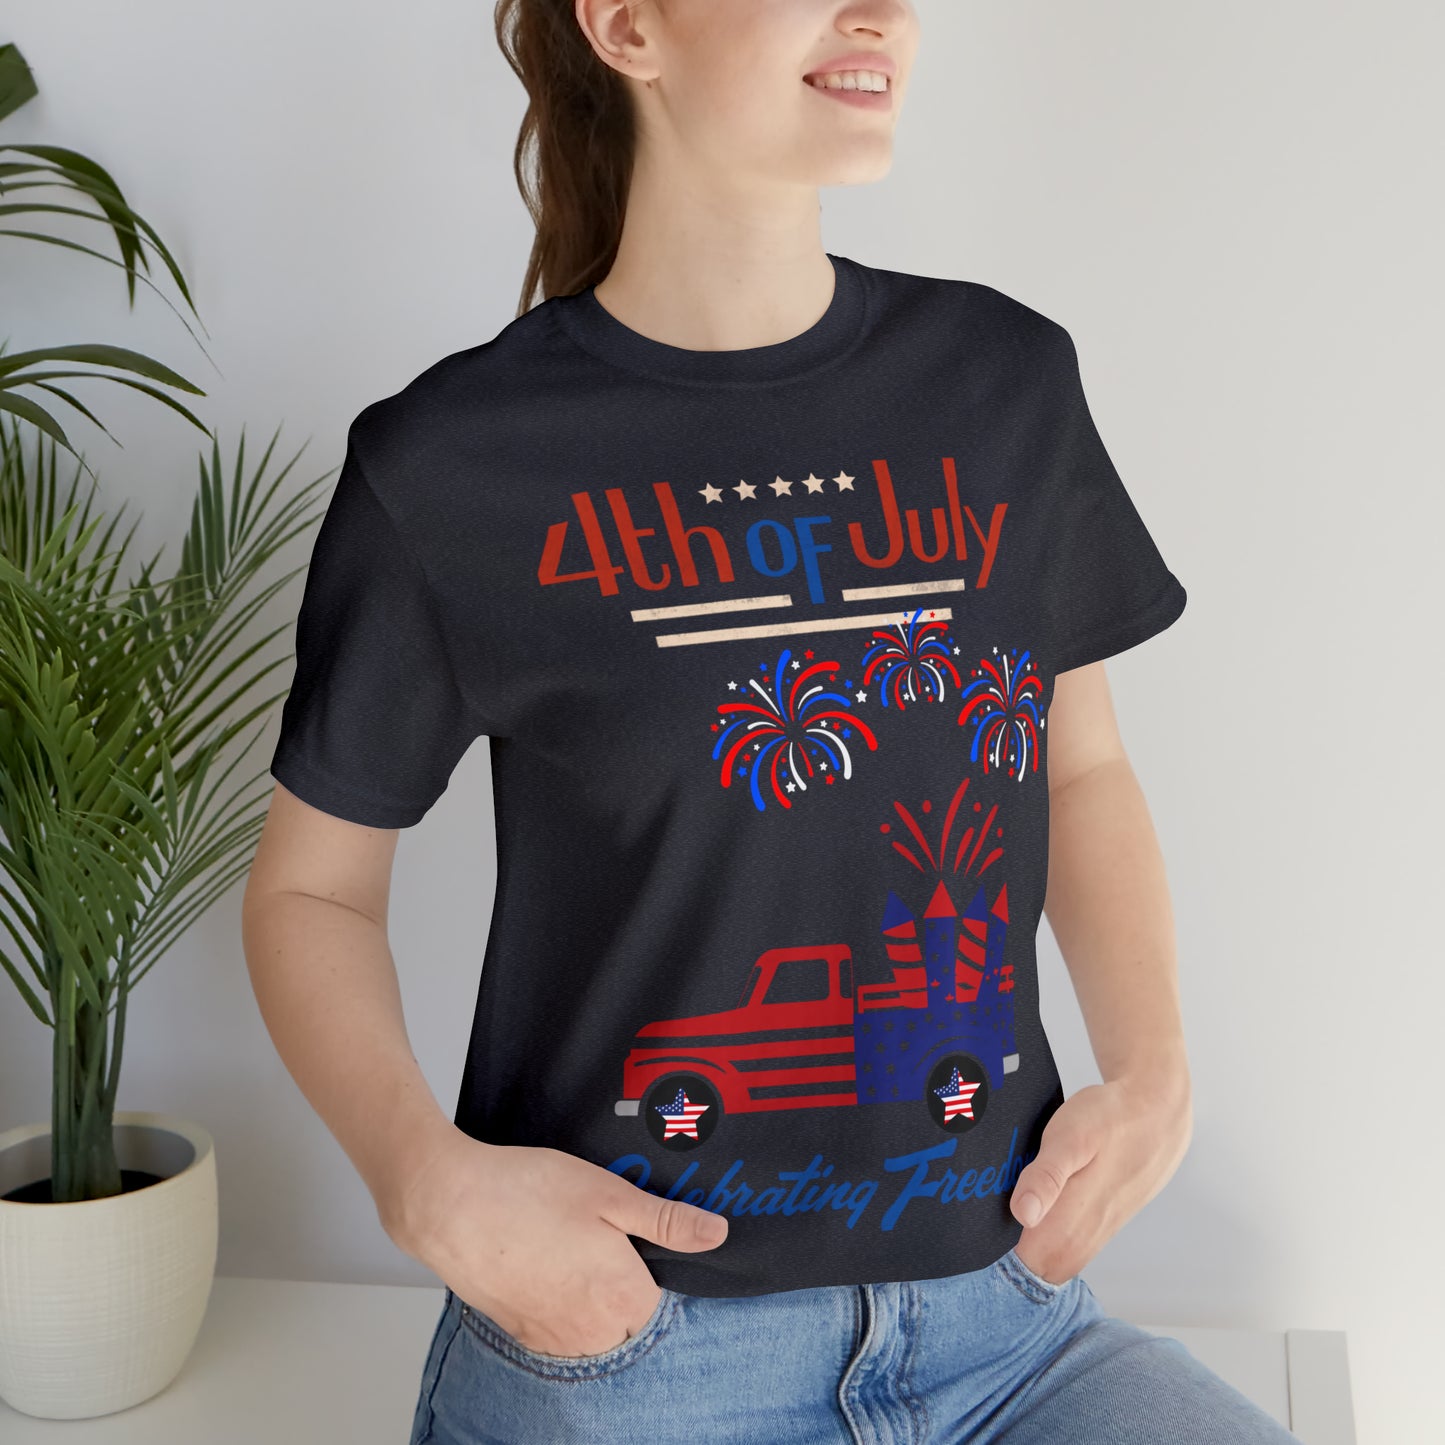 Celebrate Independence Day with Patriotic Shirts: 4th of July Shirts for Women and Men, Fireworks, Freedom, and Patriotic Designs